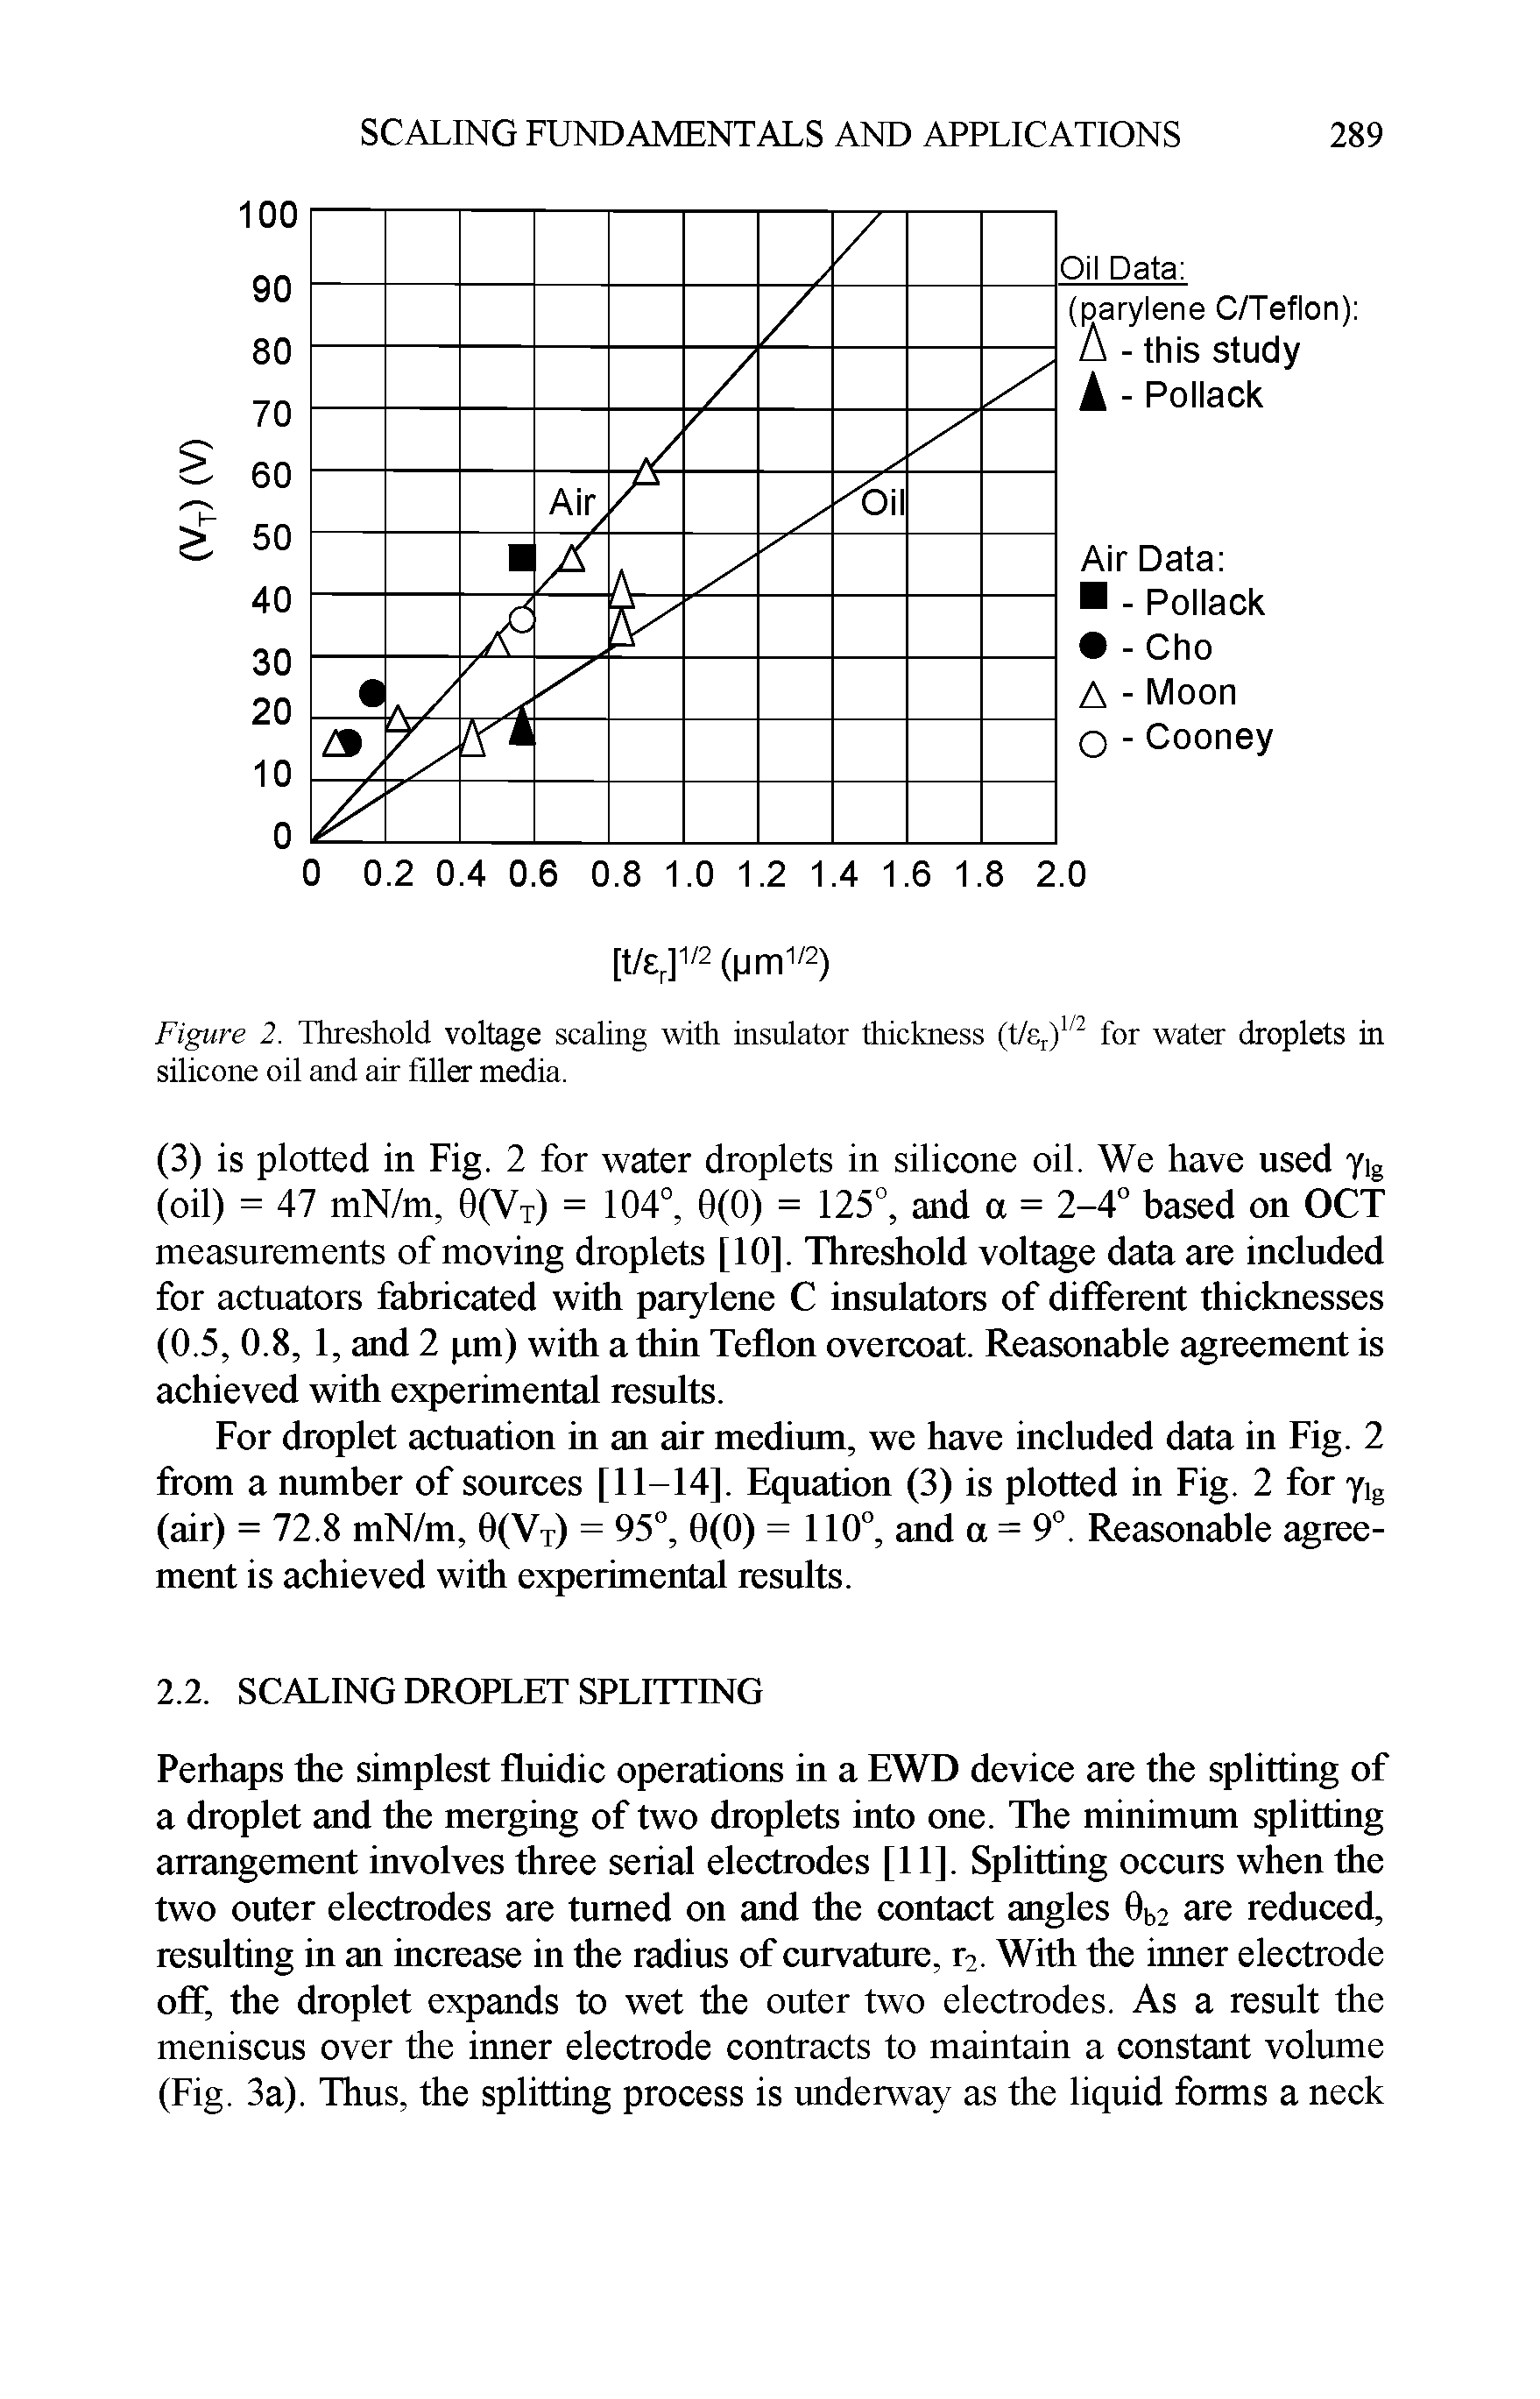 Figure 2. Threshold voltage scaling with insulator thickness (t/Sj) for water droplets in silicone oil and air filler media.